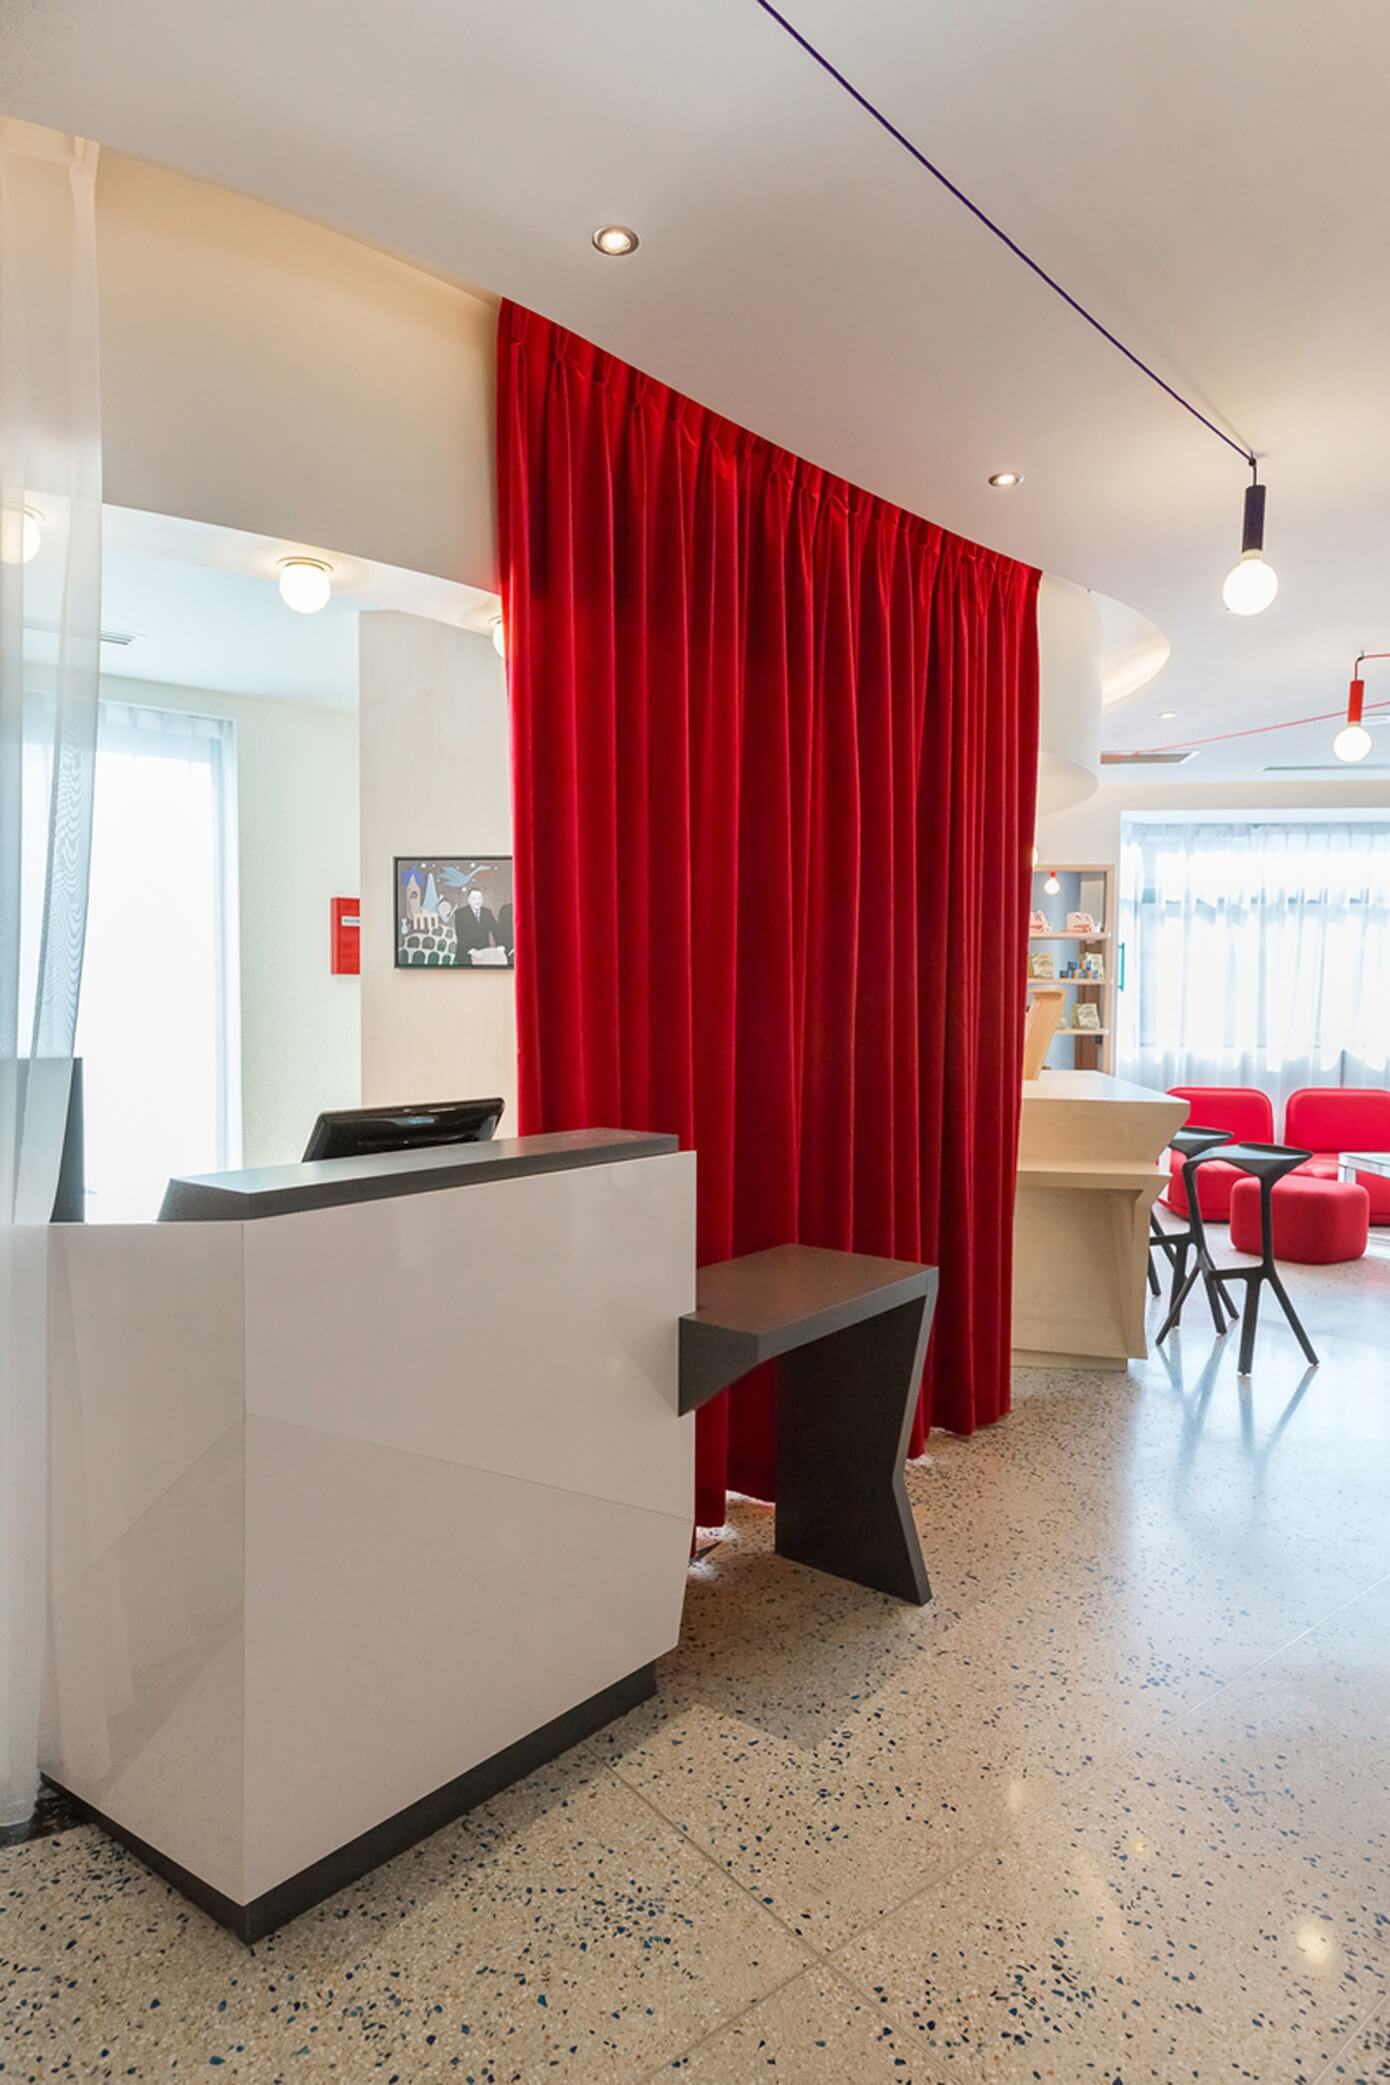 Ibis Styles Montreuil by Atelier Coste et Butin